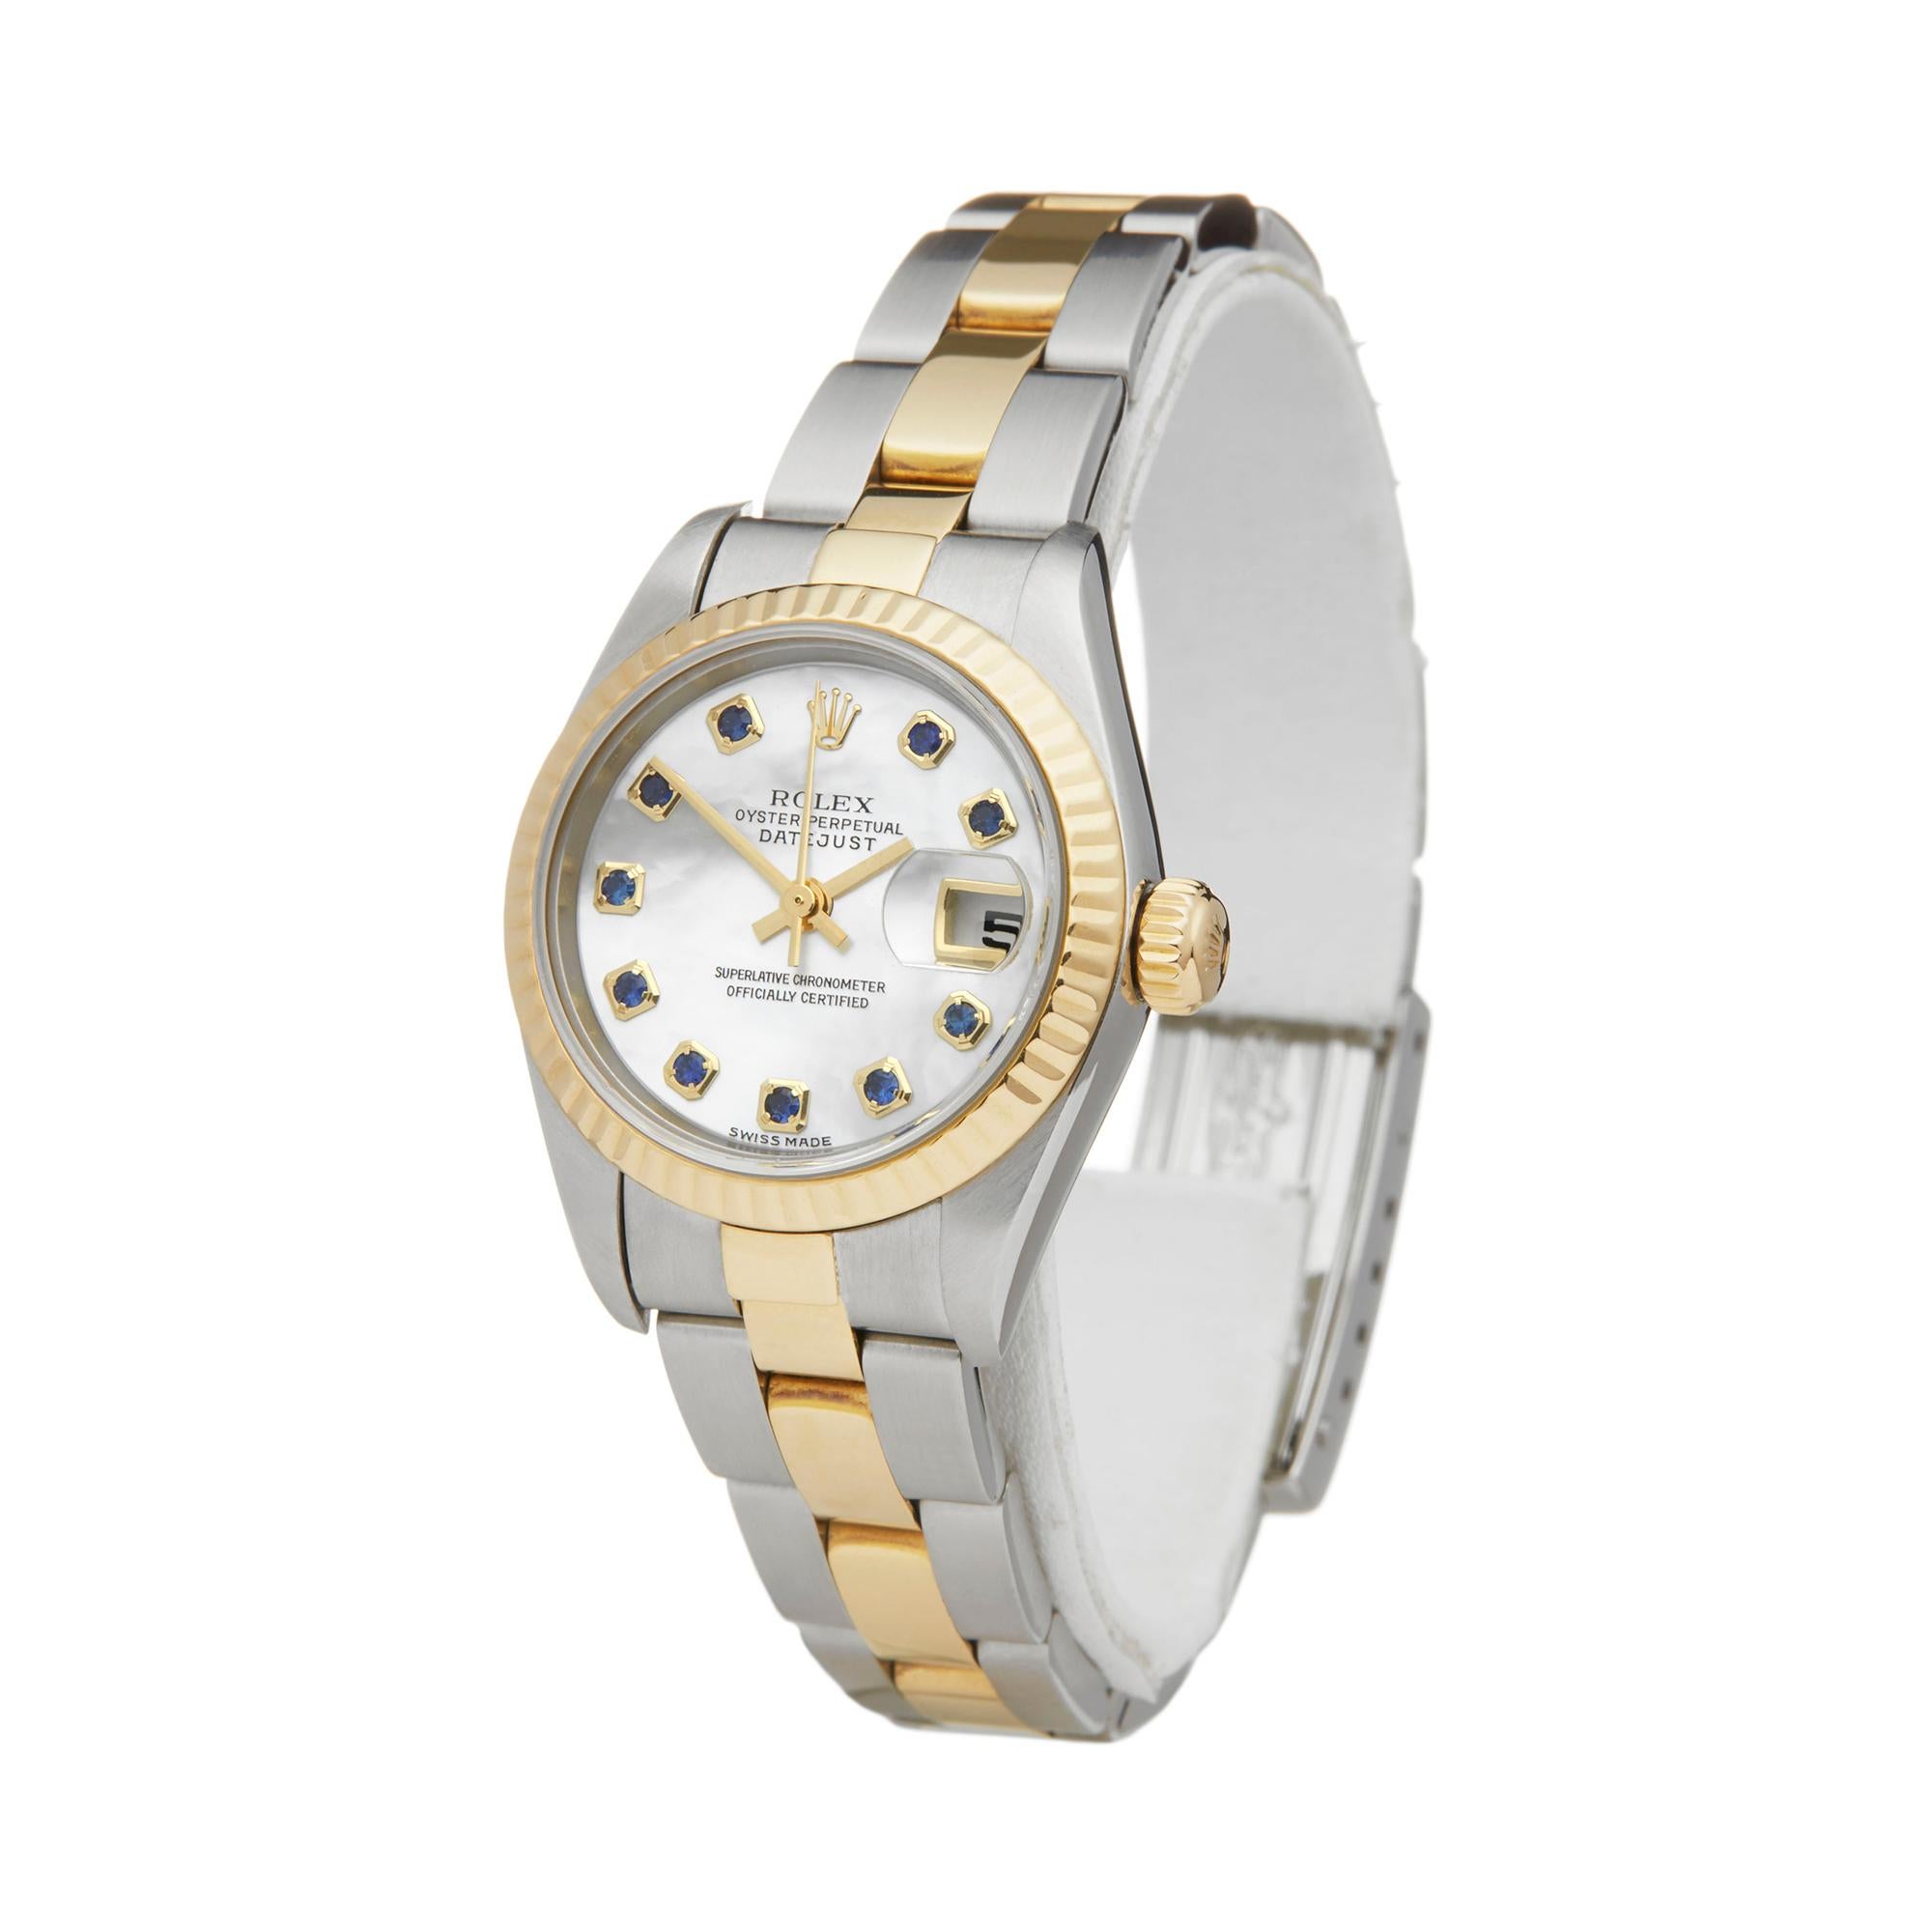 Reference: W6091
Manufacturer: Rolex
Model: Datejust
Model Reference: 79173
Age: Circa 2002
Gender: Women's
Box and Papers: Box Manuals and Swing Tags
Dial: Mother Of Pearl Sapphire
Glass: Sapphire Crystal
Movement: Automatic
Water Resistance: To